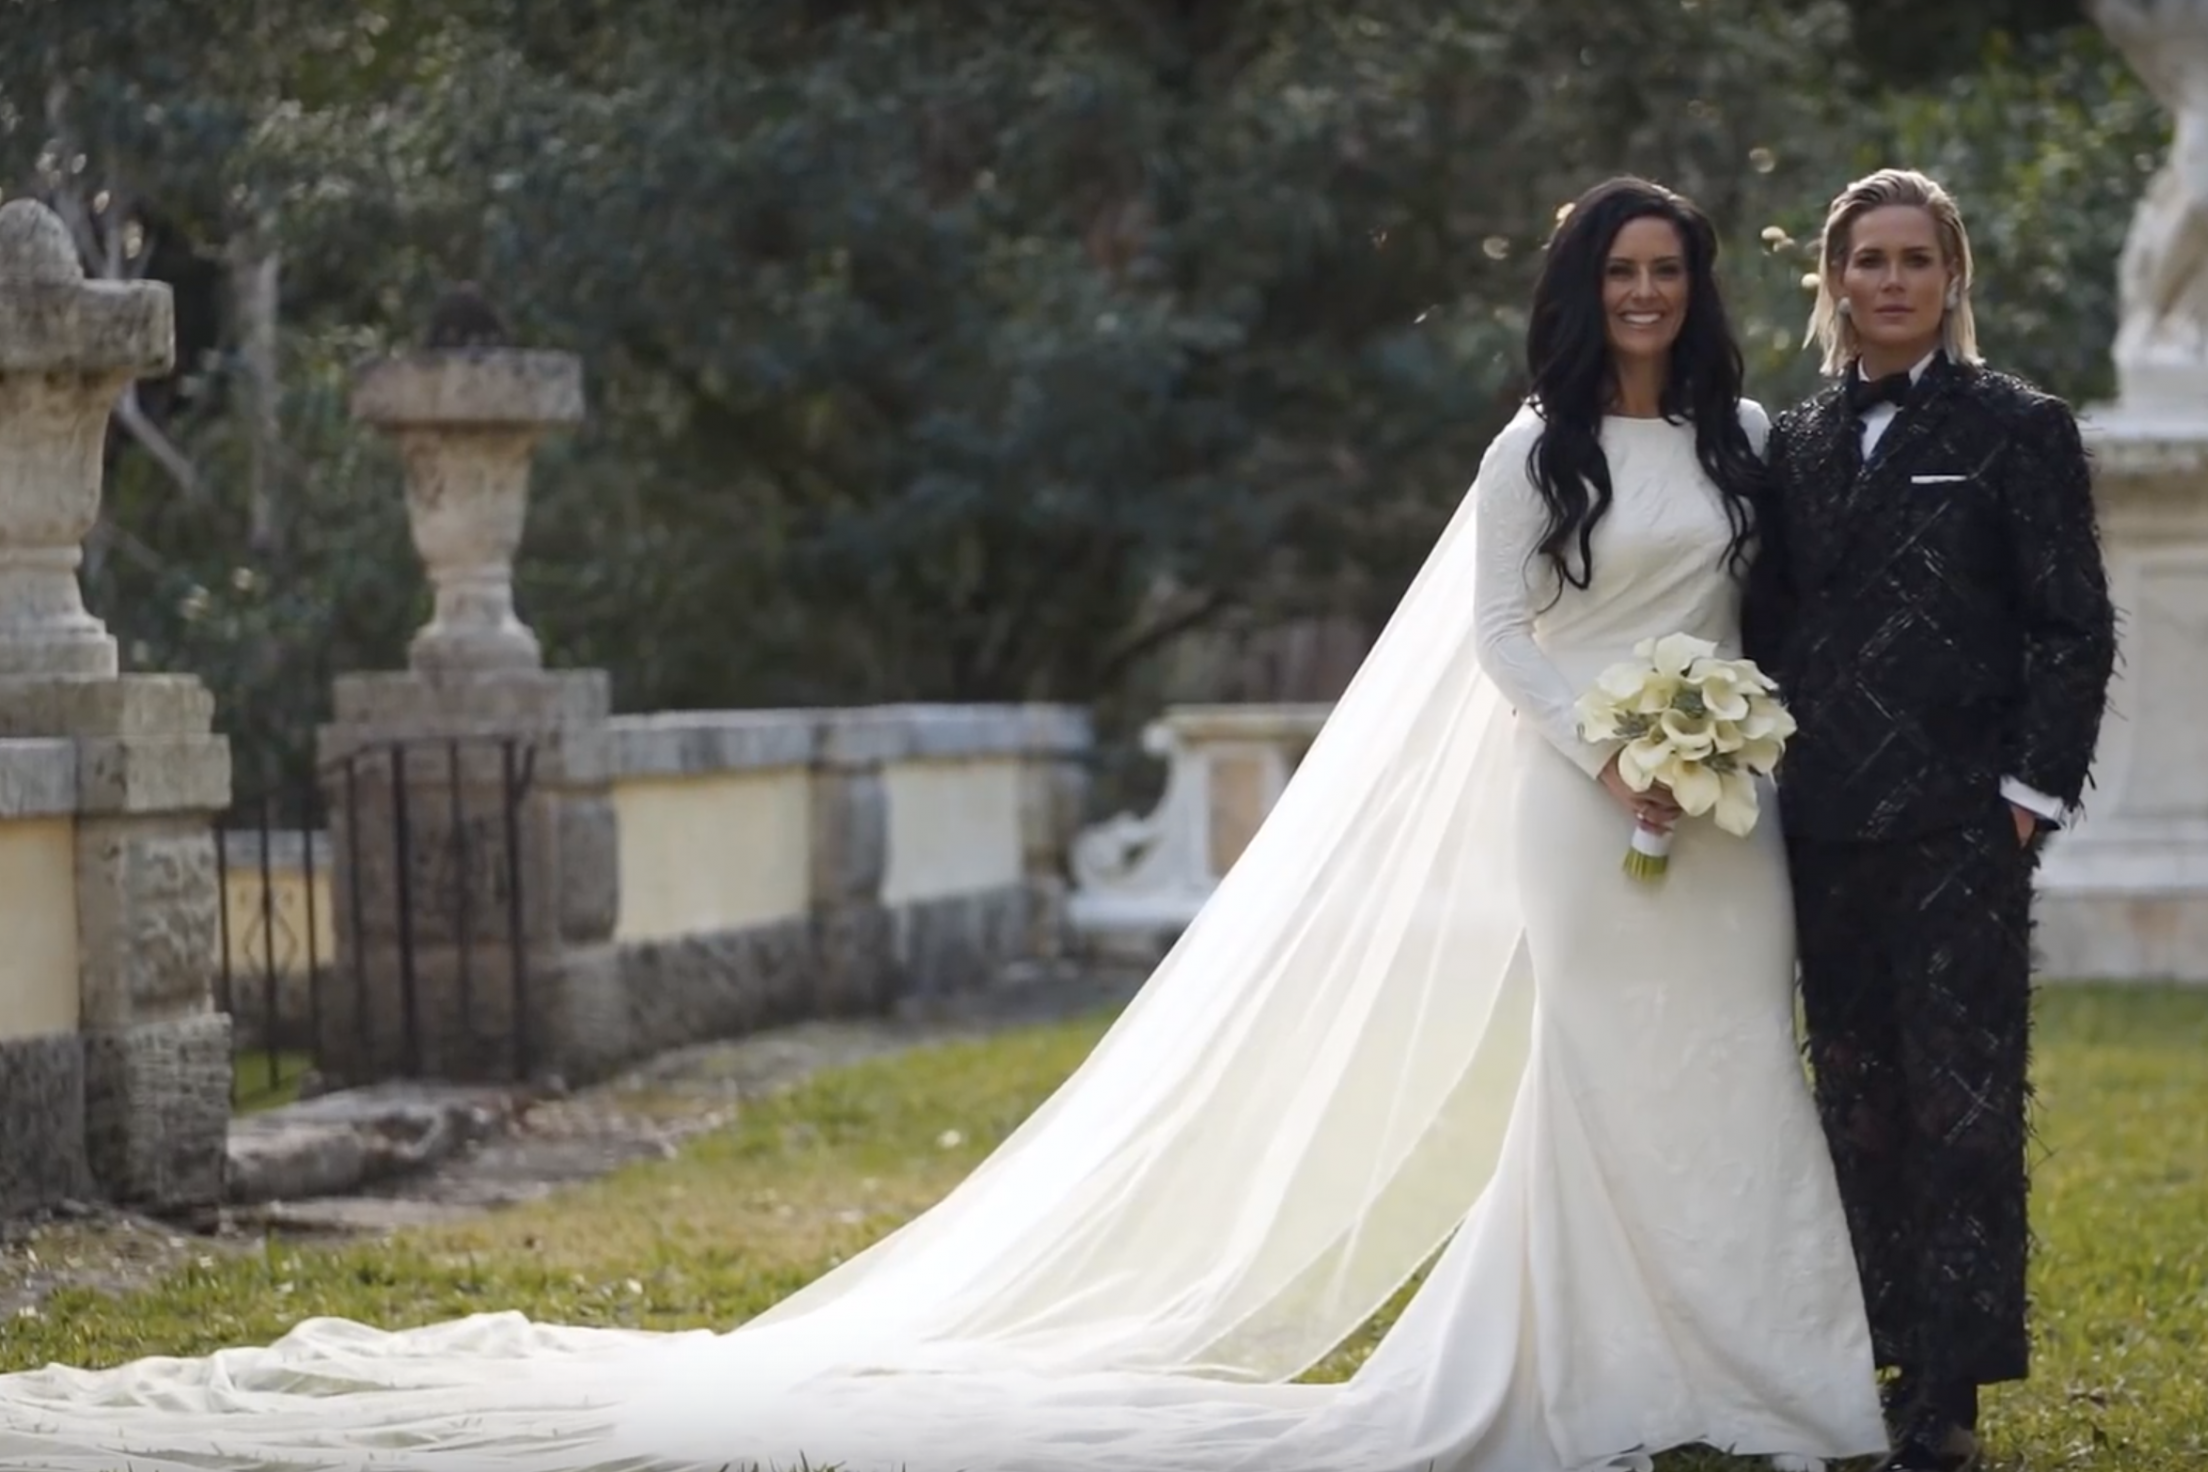 Harris and Krieger tied the knot in Miami, Florida (YouTube: Timeline Video Productions)